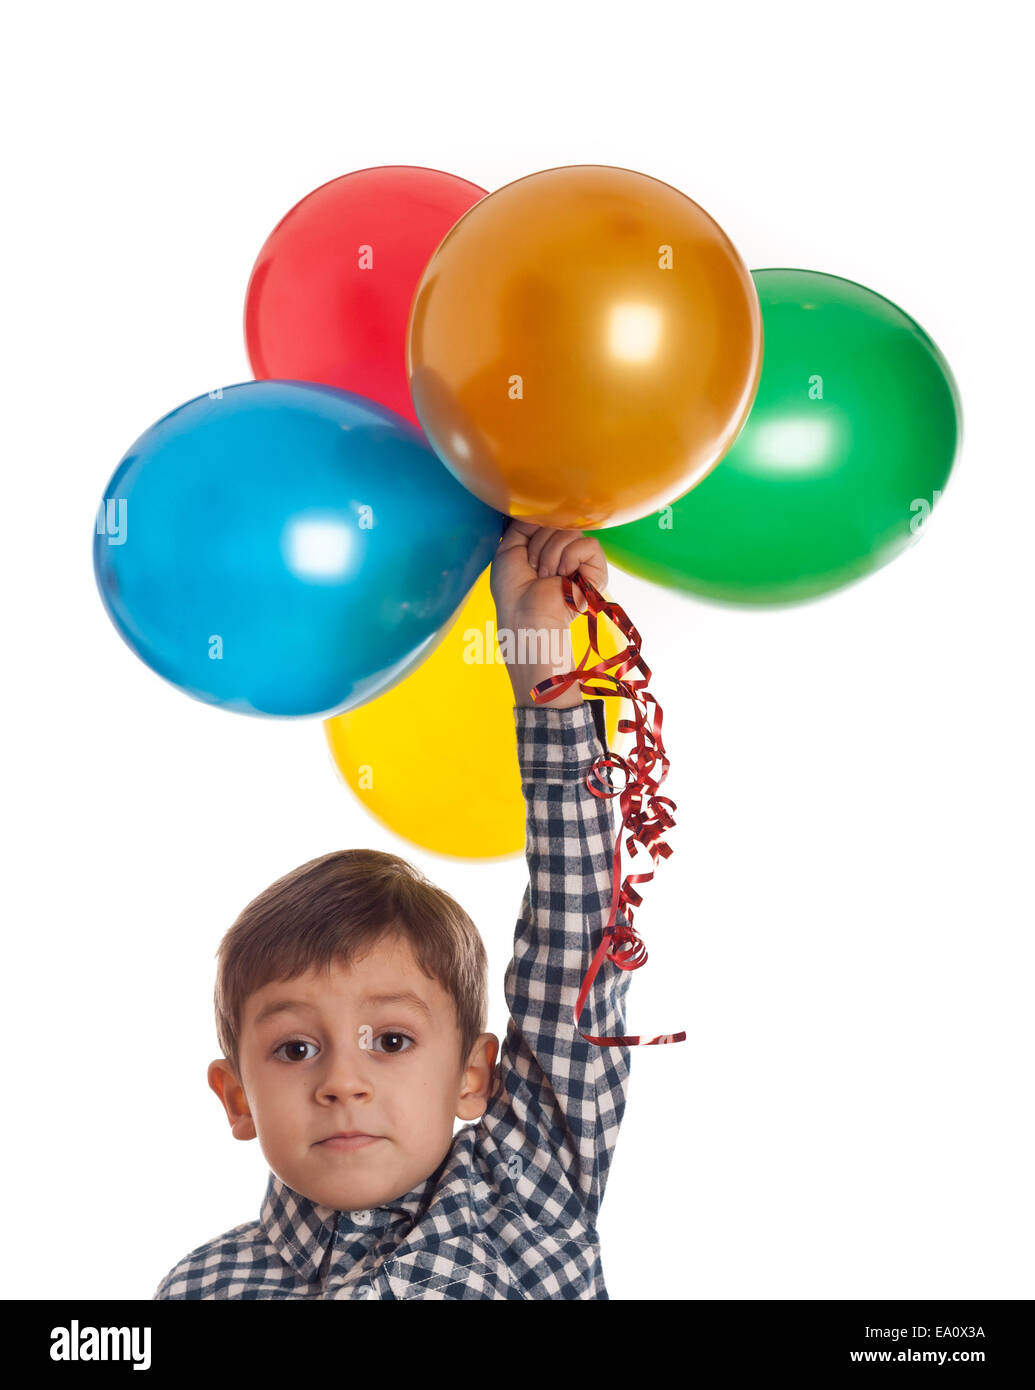 boy with balloons Stock Photo